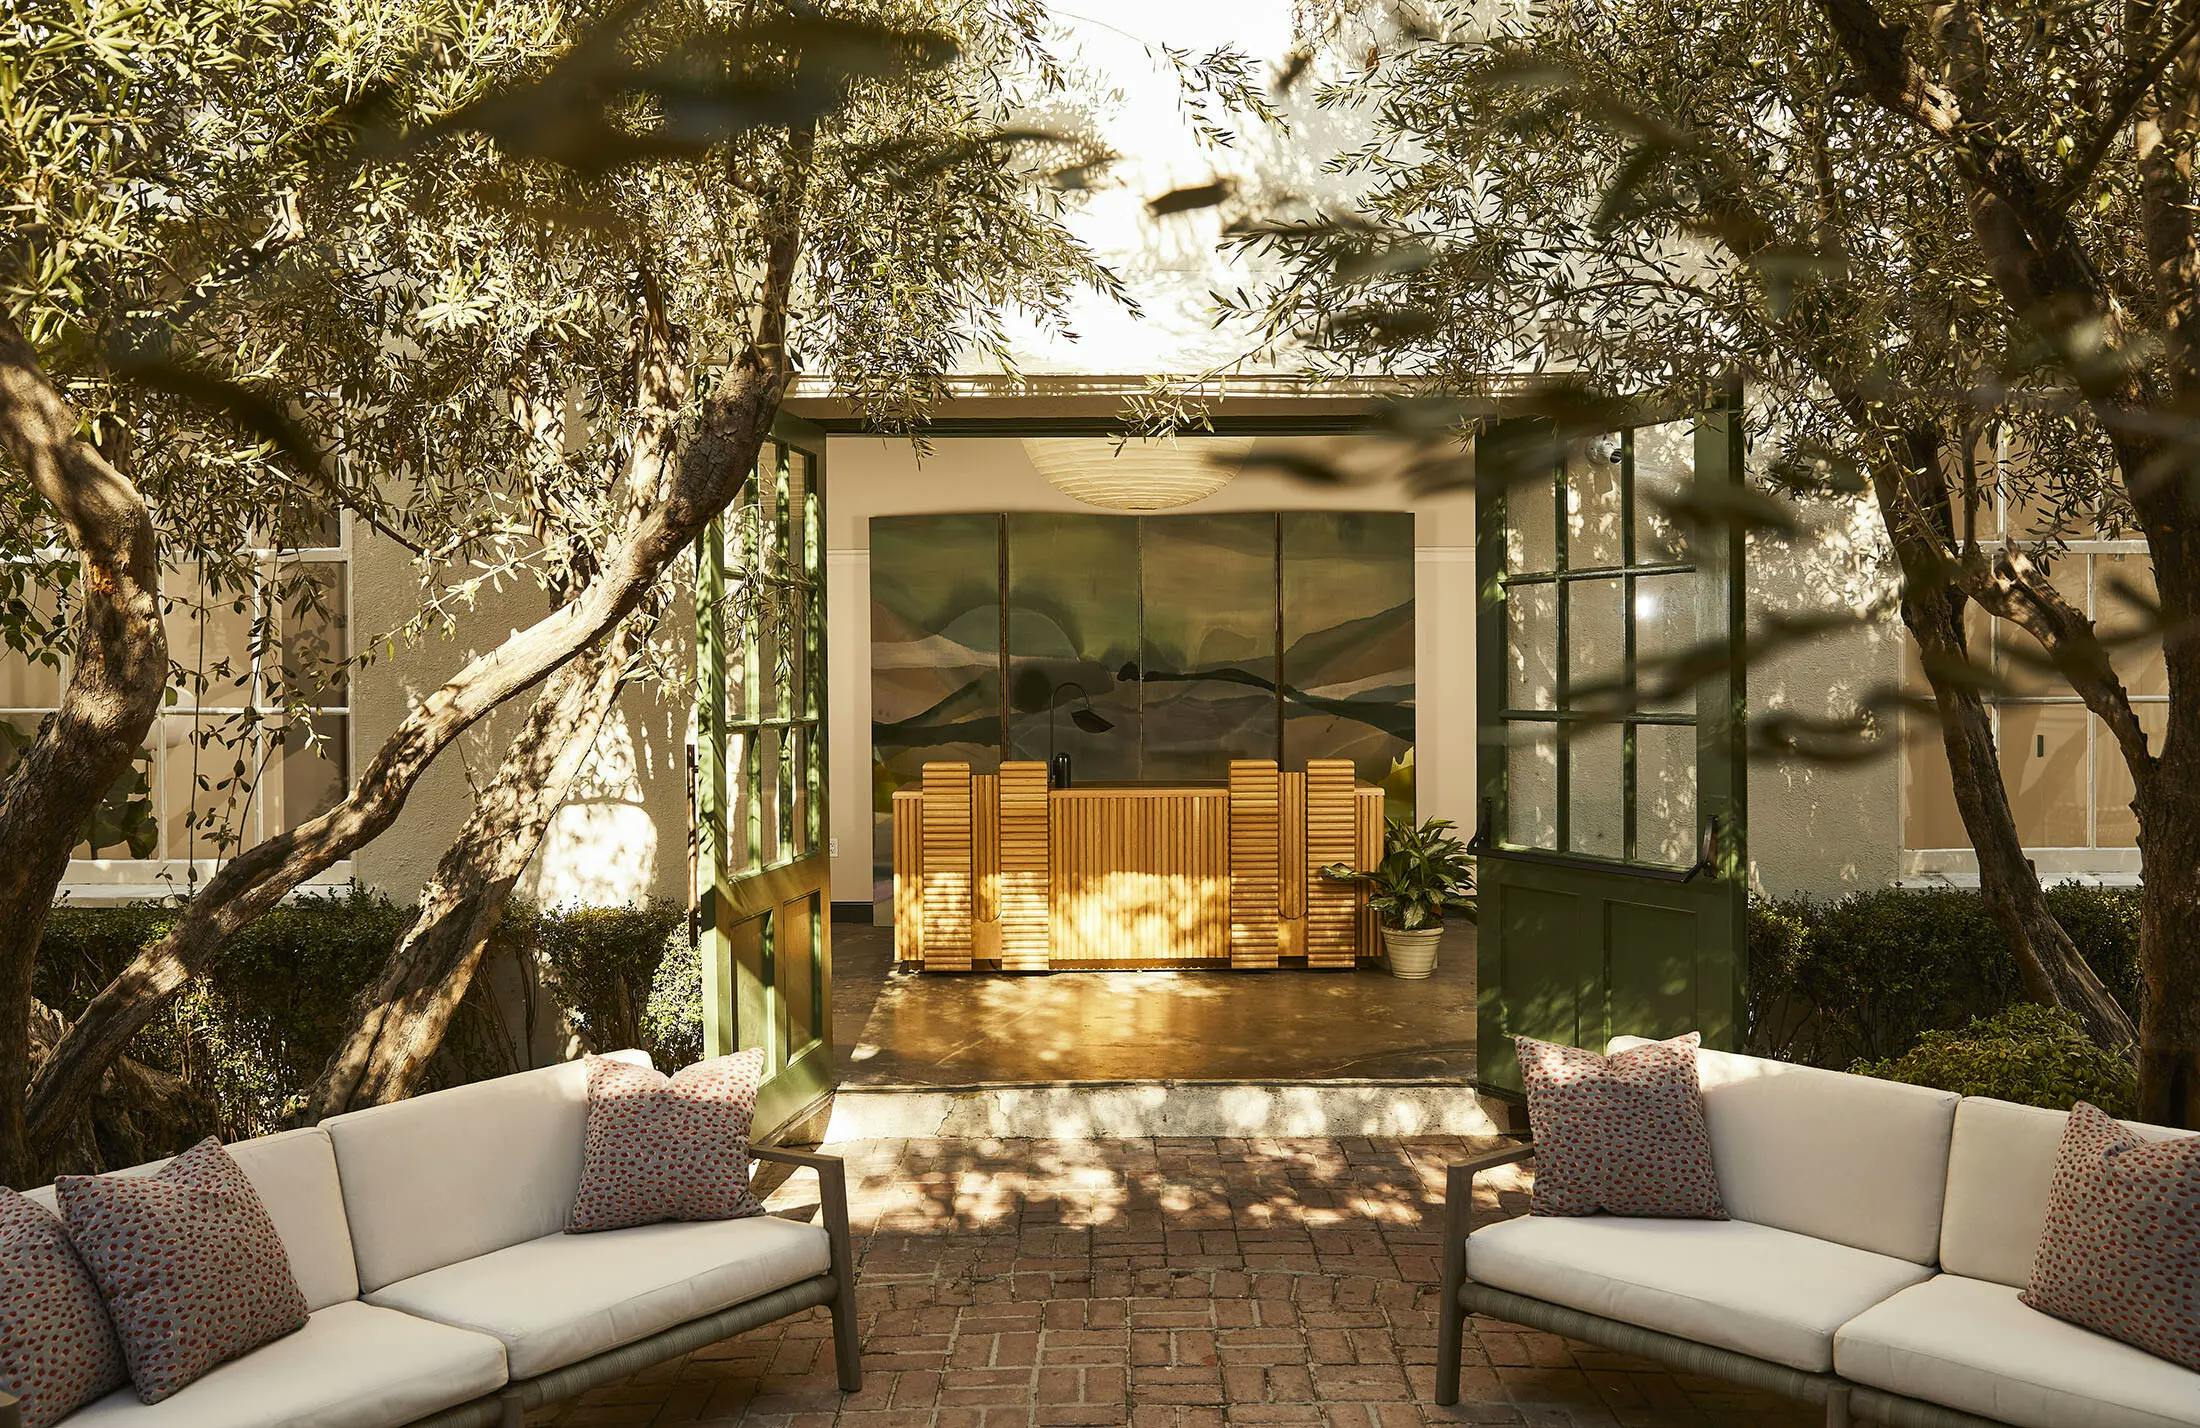 Green french doors leading to the outside patio with trees at the Chief Los Angeles Clubhouse.